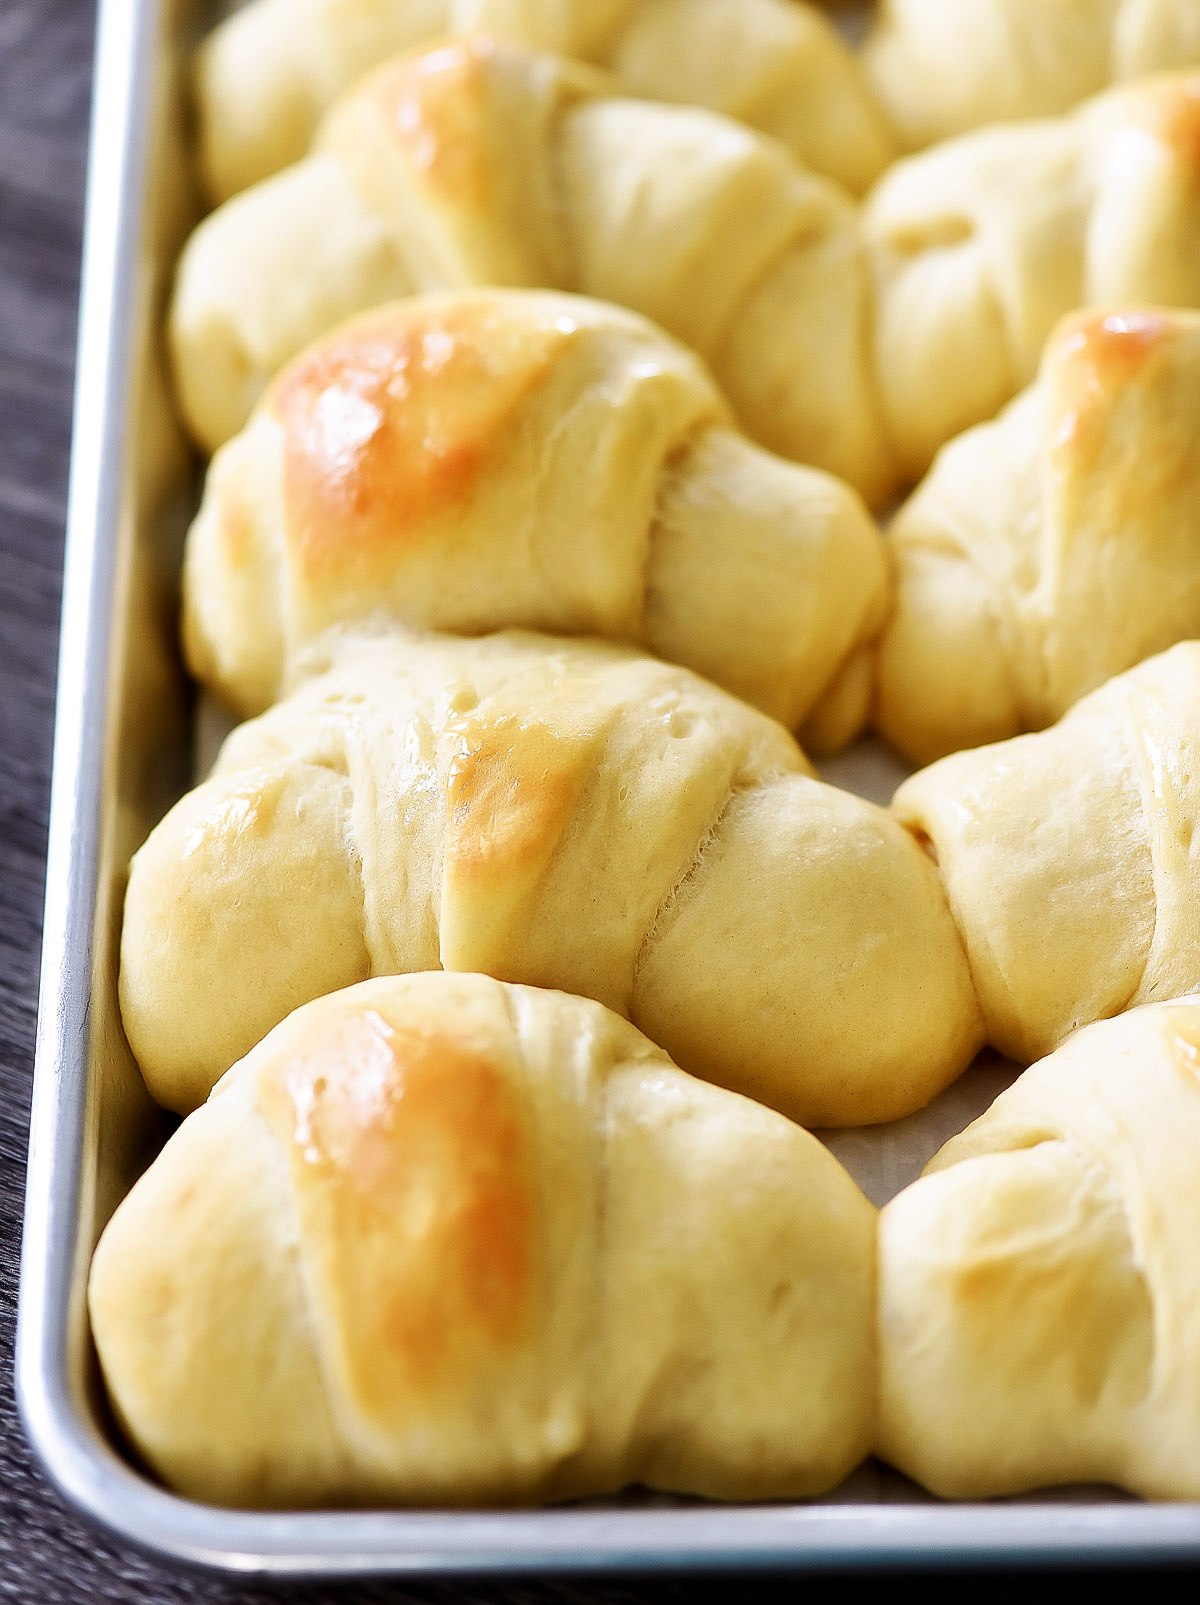 Amazing Dinner Rolls are soft, buttery and truly amazing homemade dinner rolls. Life-in-the-Lofthouse.com